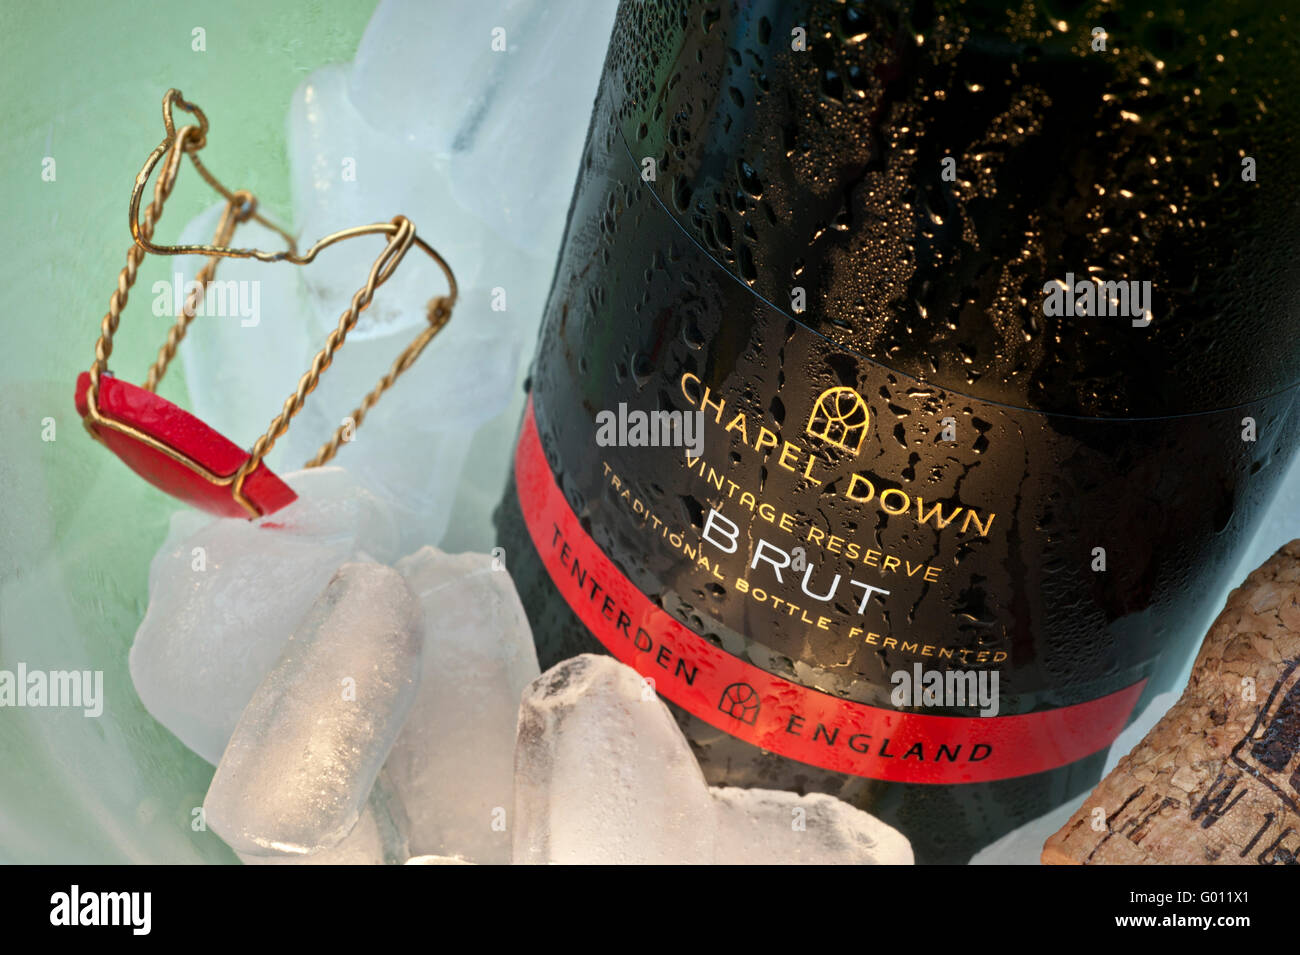 Award winning English sparkling wine 'Chapel Down Brut'  bottle on ice in wine cooler with cork and retaining cap Stock Photo